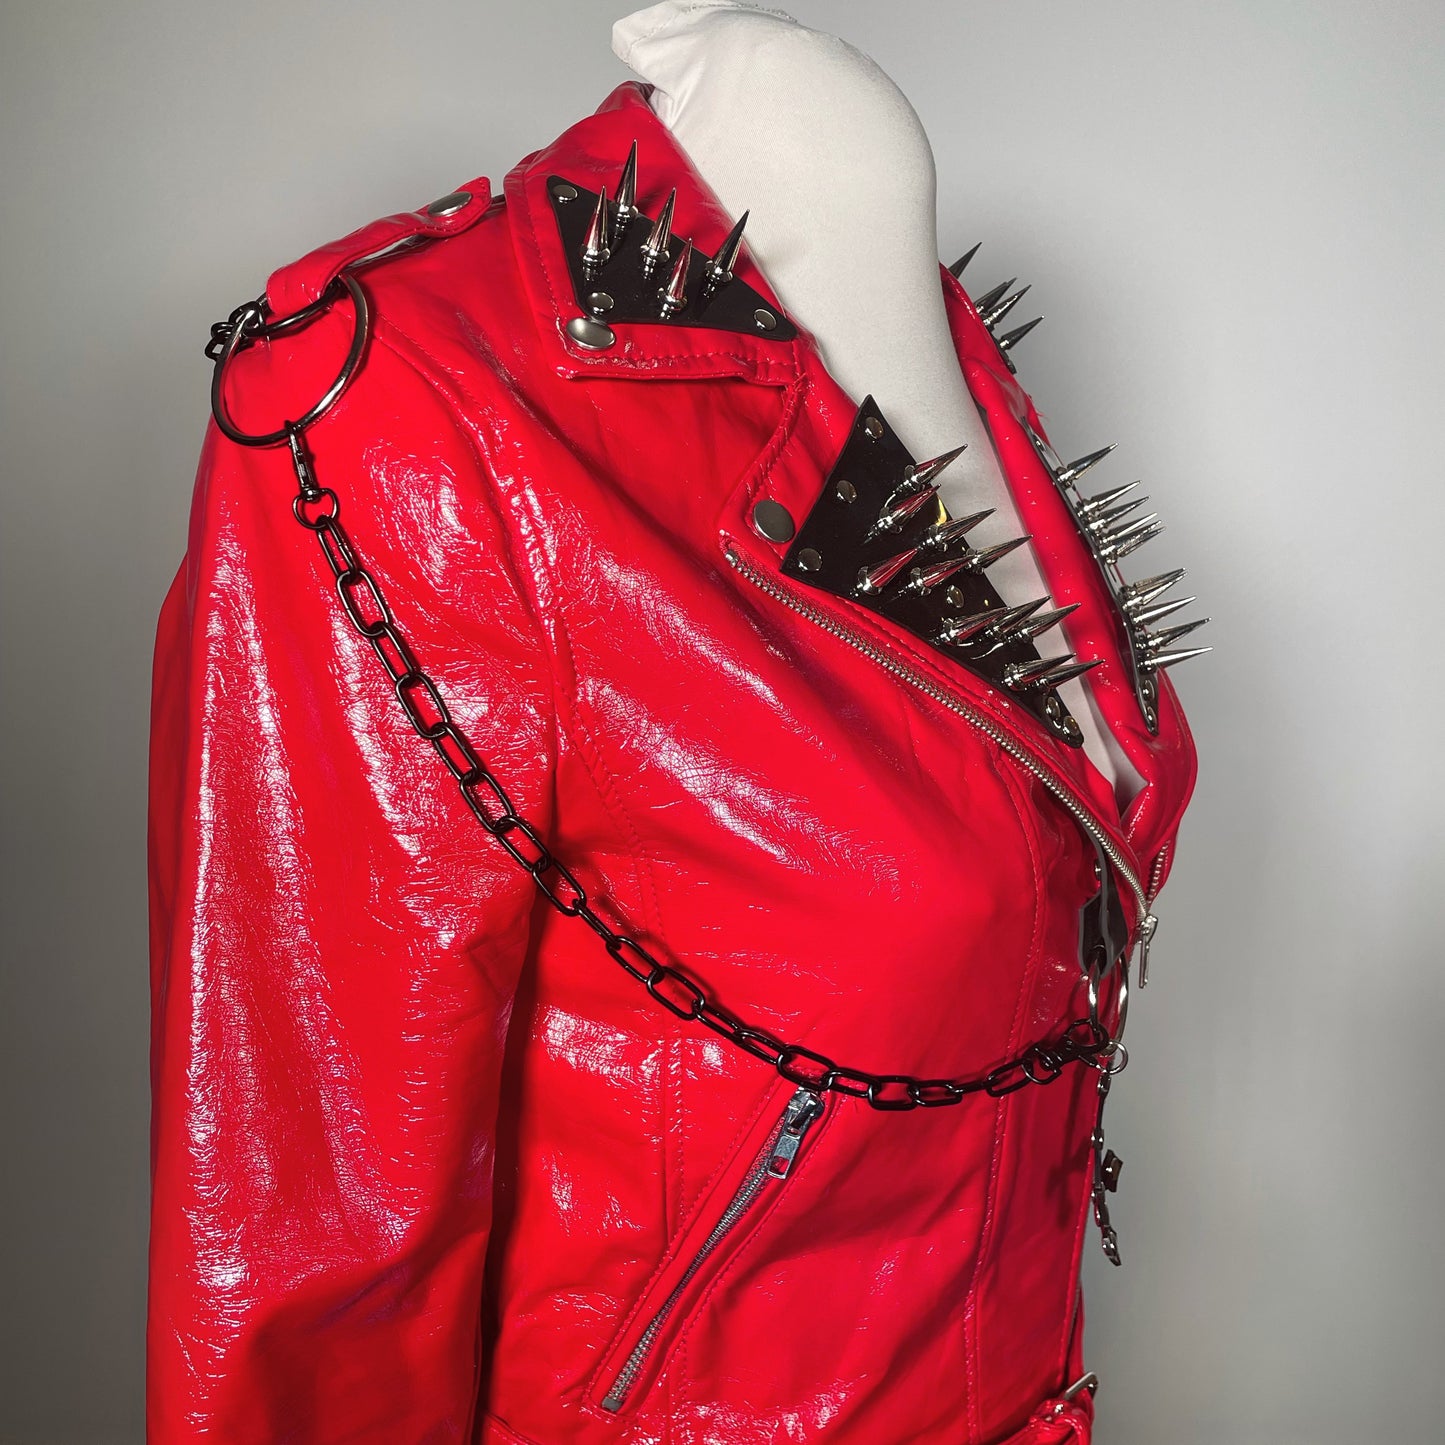 Red PVC Vinyl Goth Moto Jacket with Black PVC Cross, Collar and Black Chains